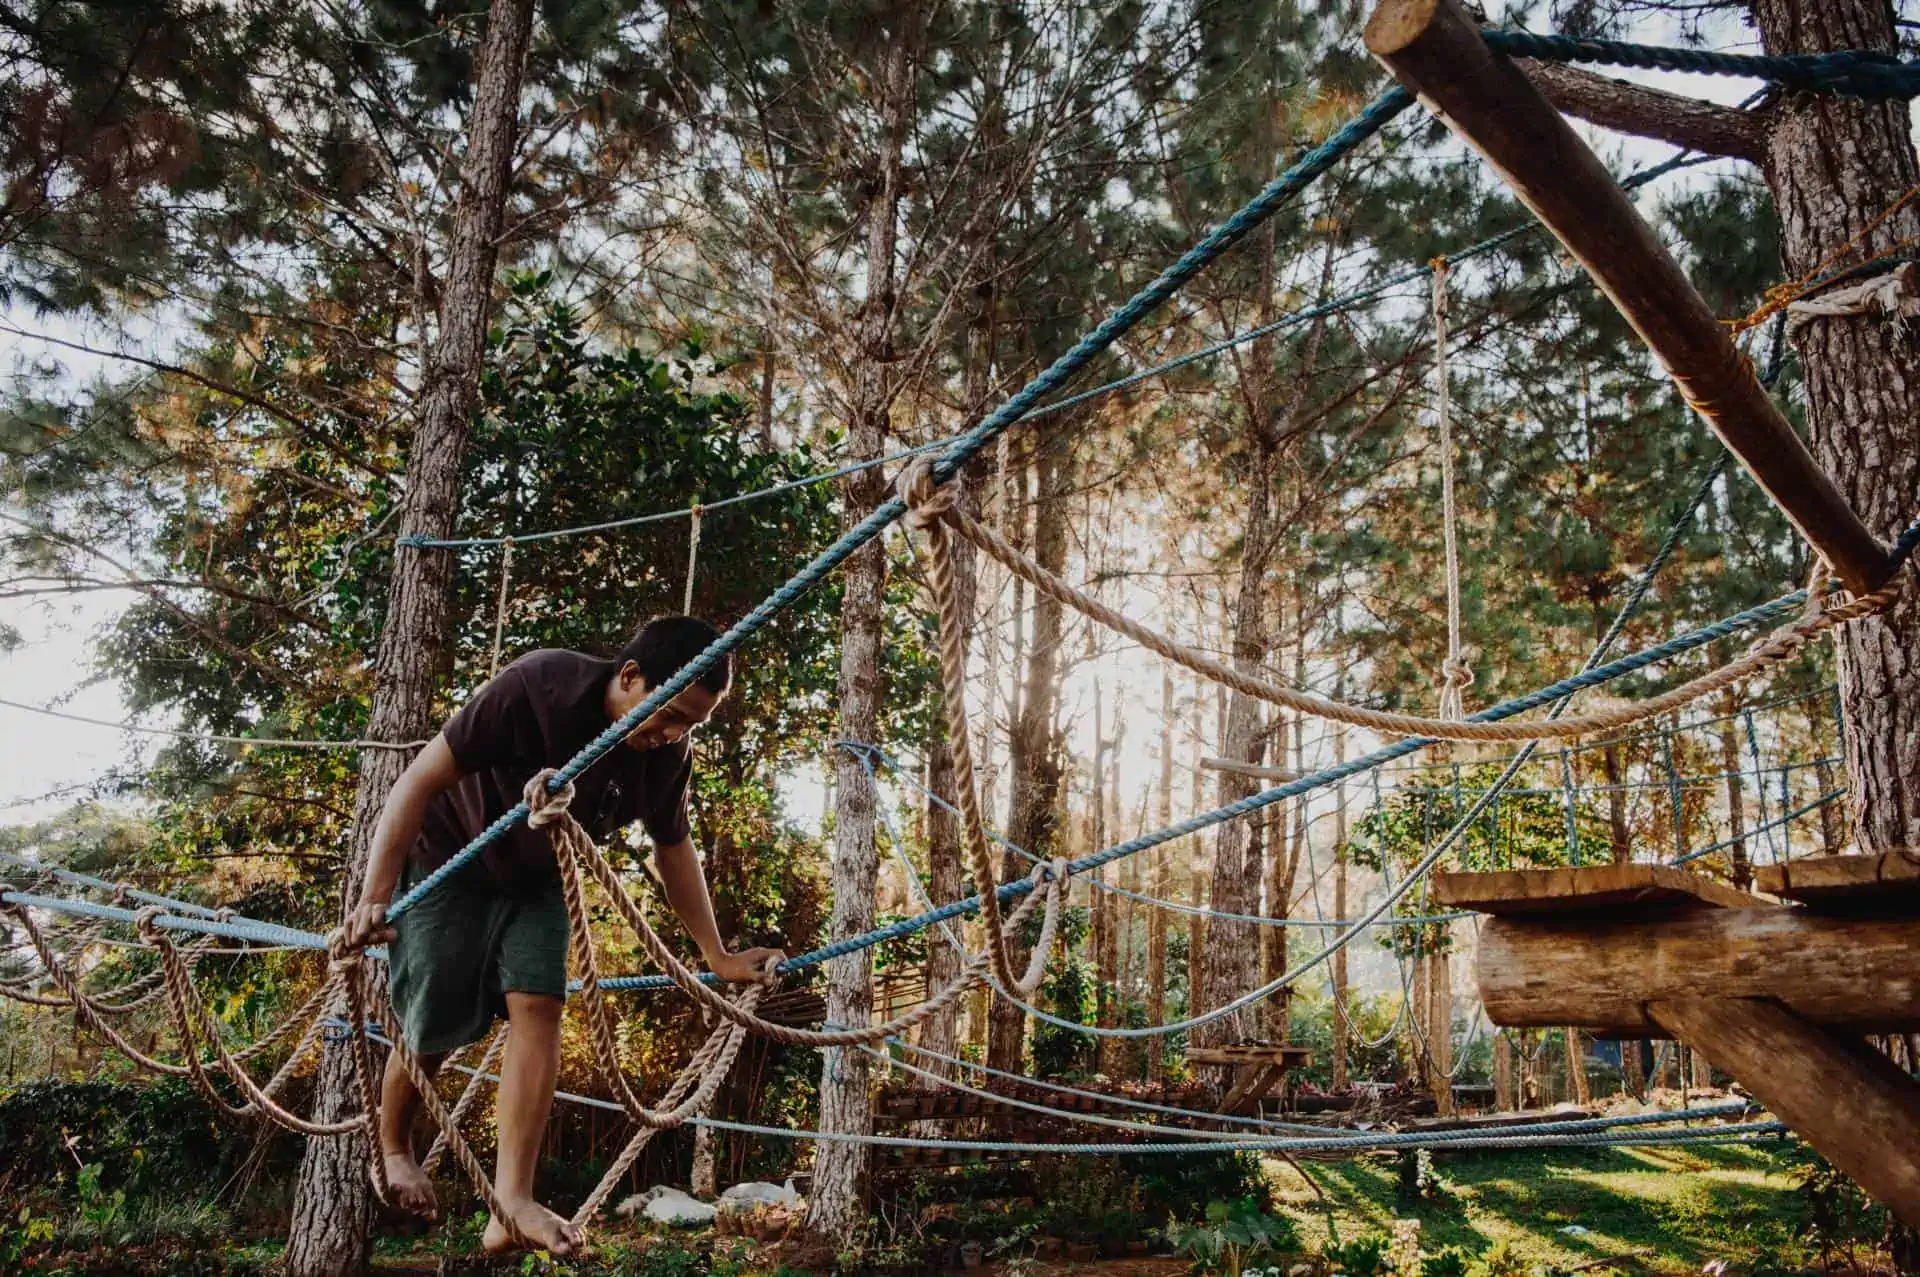 How to Create a DIY Agility Course in Your Backyard